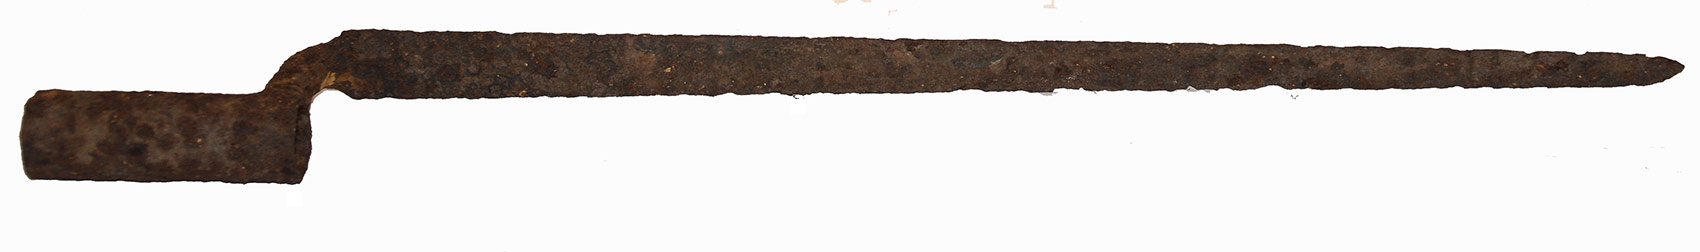 RELIC M1816 BAYONET RECOVERED AT GETTYSBURG – STANLEY WOLF COLLECTION